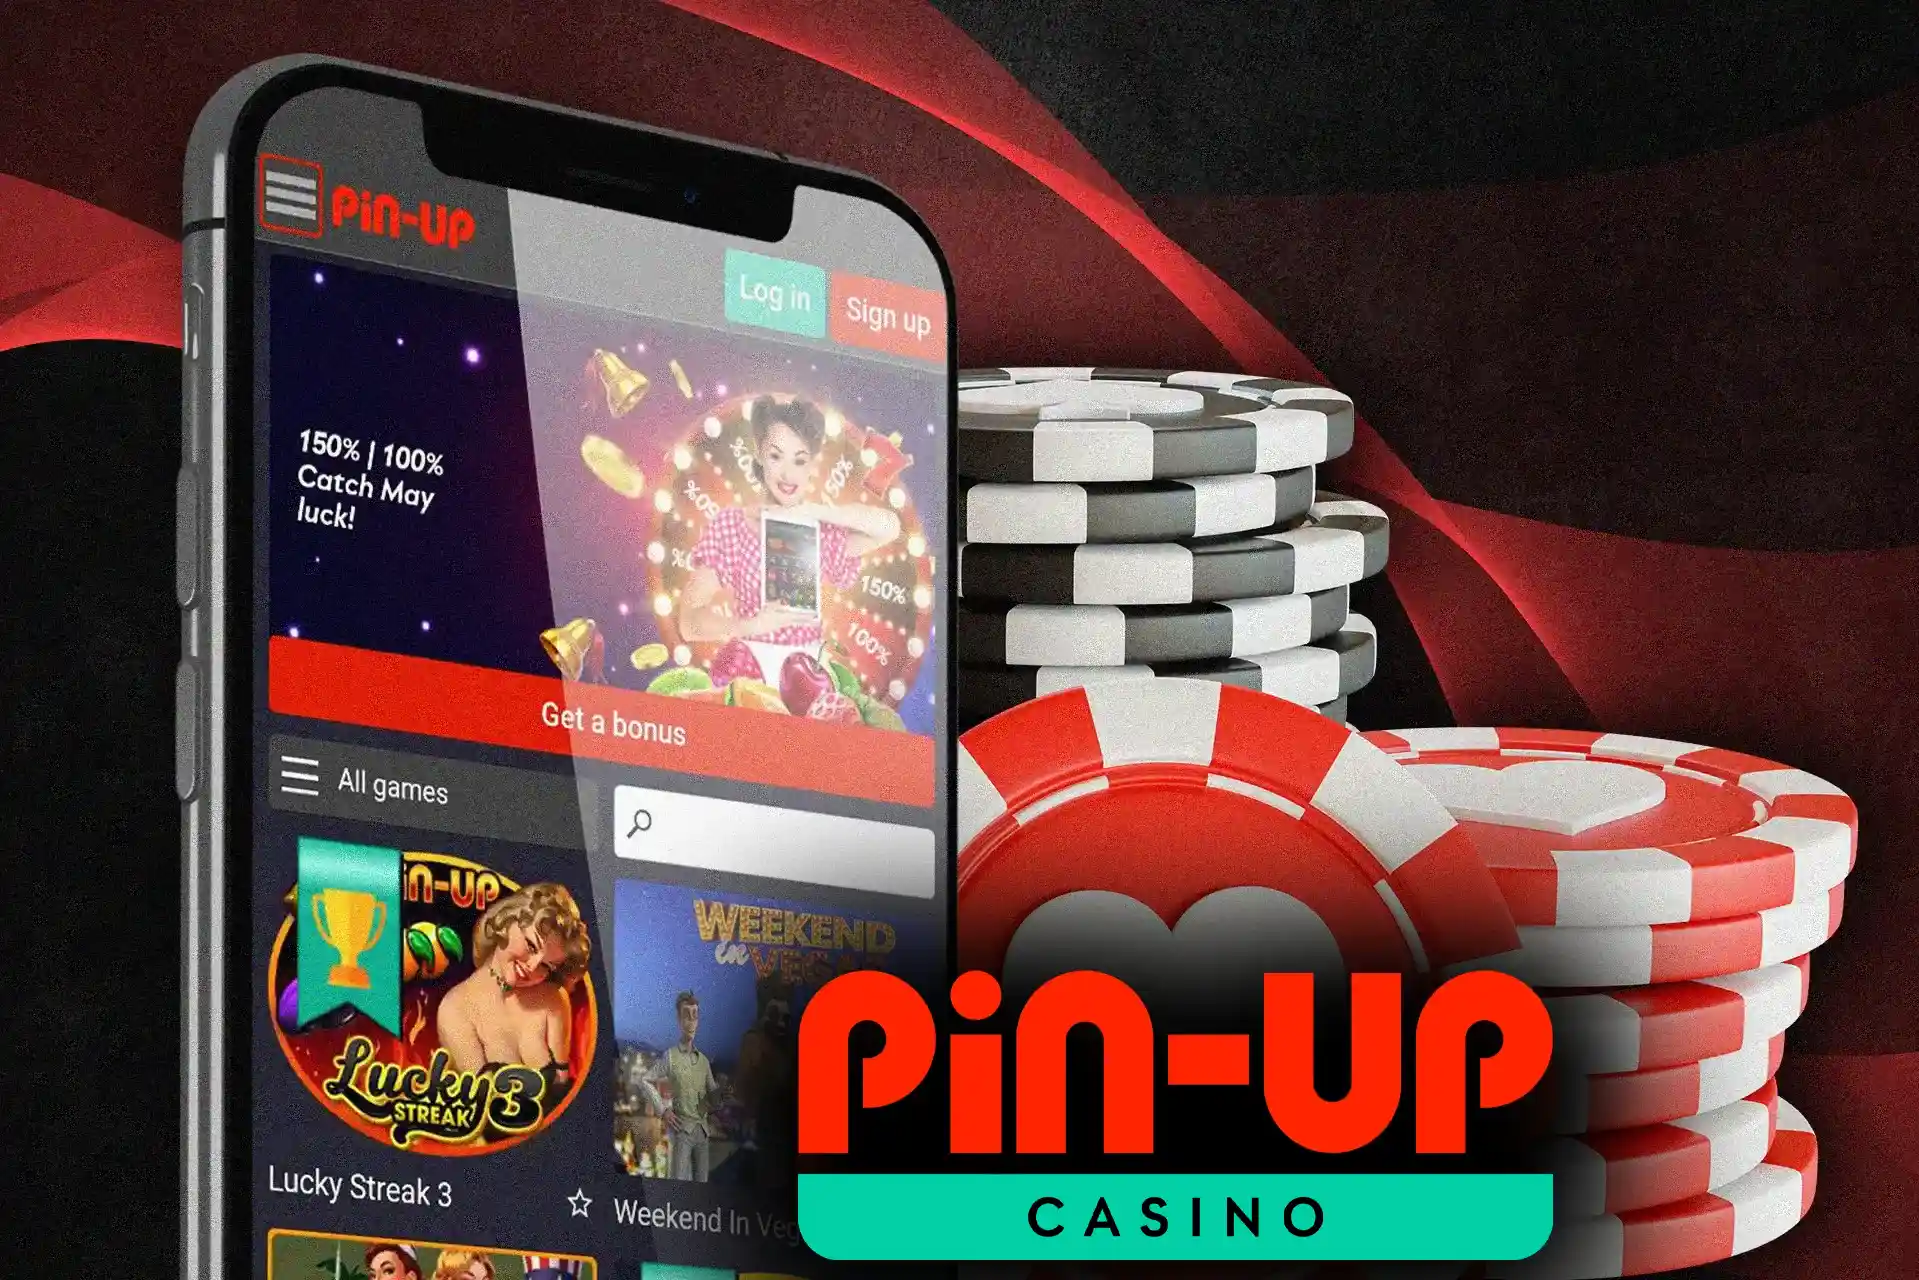 Choose your favorite casino games and play right in the app.